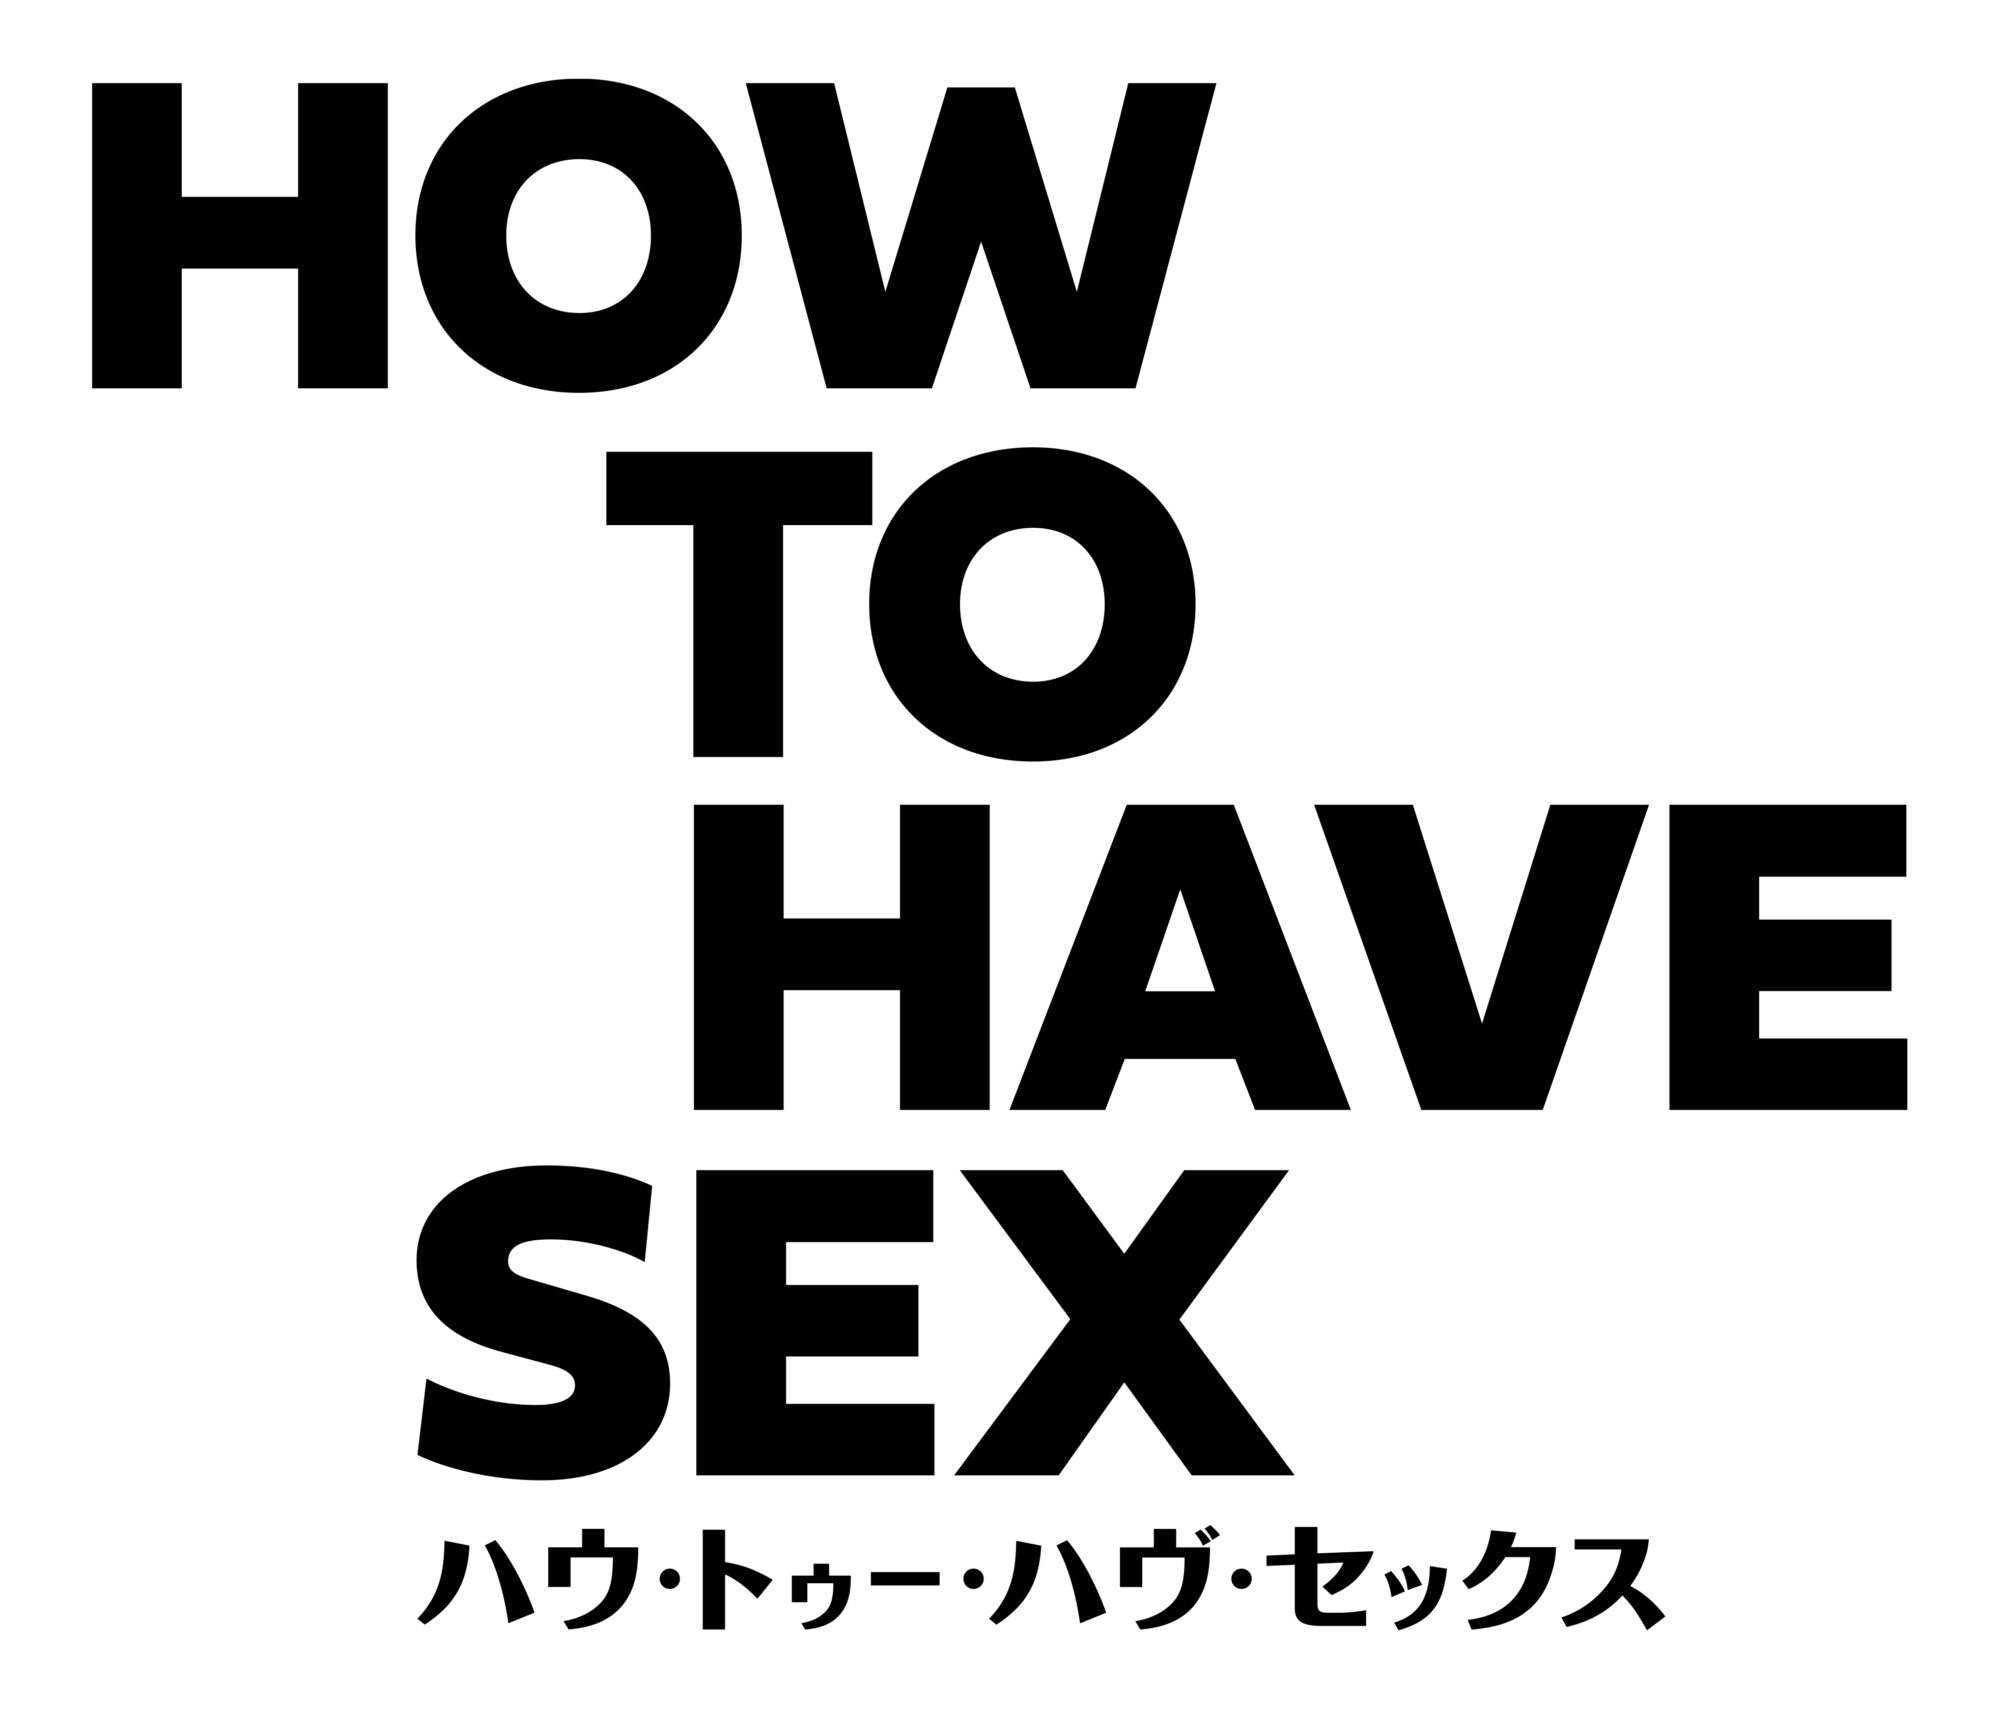 HOW TO HAVE SEX